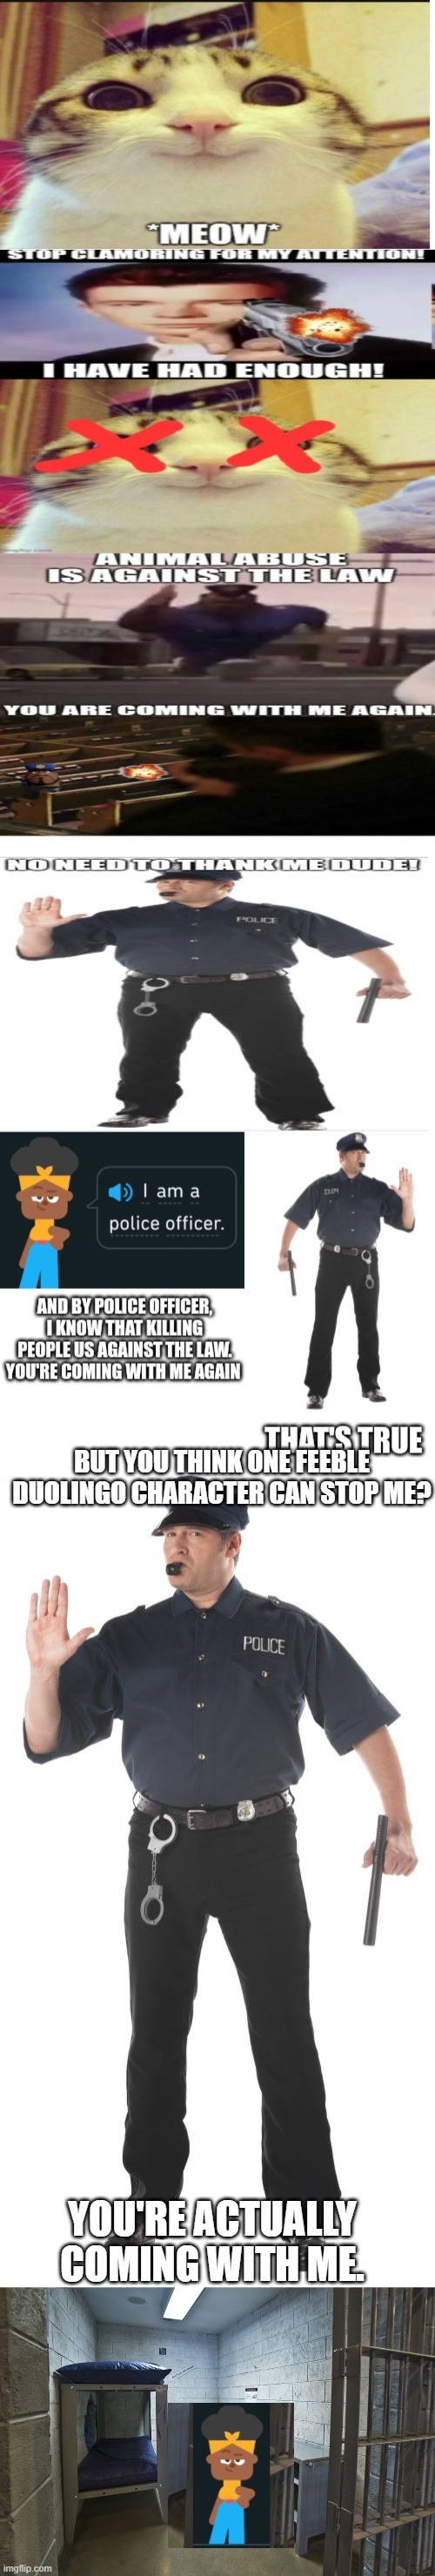 BUT YOU THINK ONE FEEBLE DUOLINGO CHARACTER CAN STOP ME? YOU'RE ACTUALLY COMING WITH ME. | image tagged in memes,stop cop,jail cell | made w/ Imgflip meme maker